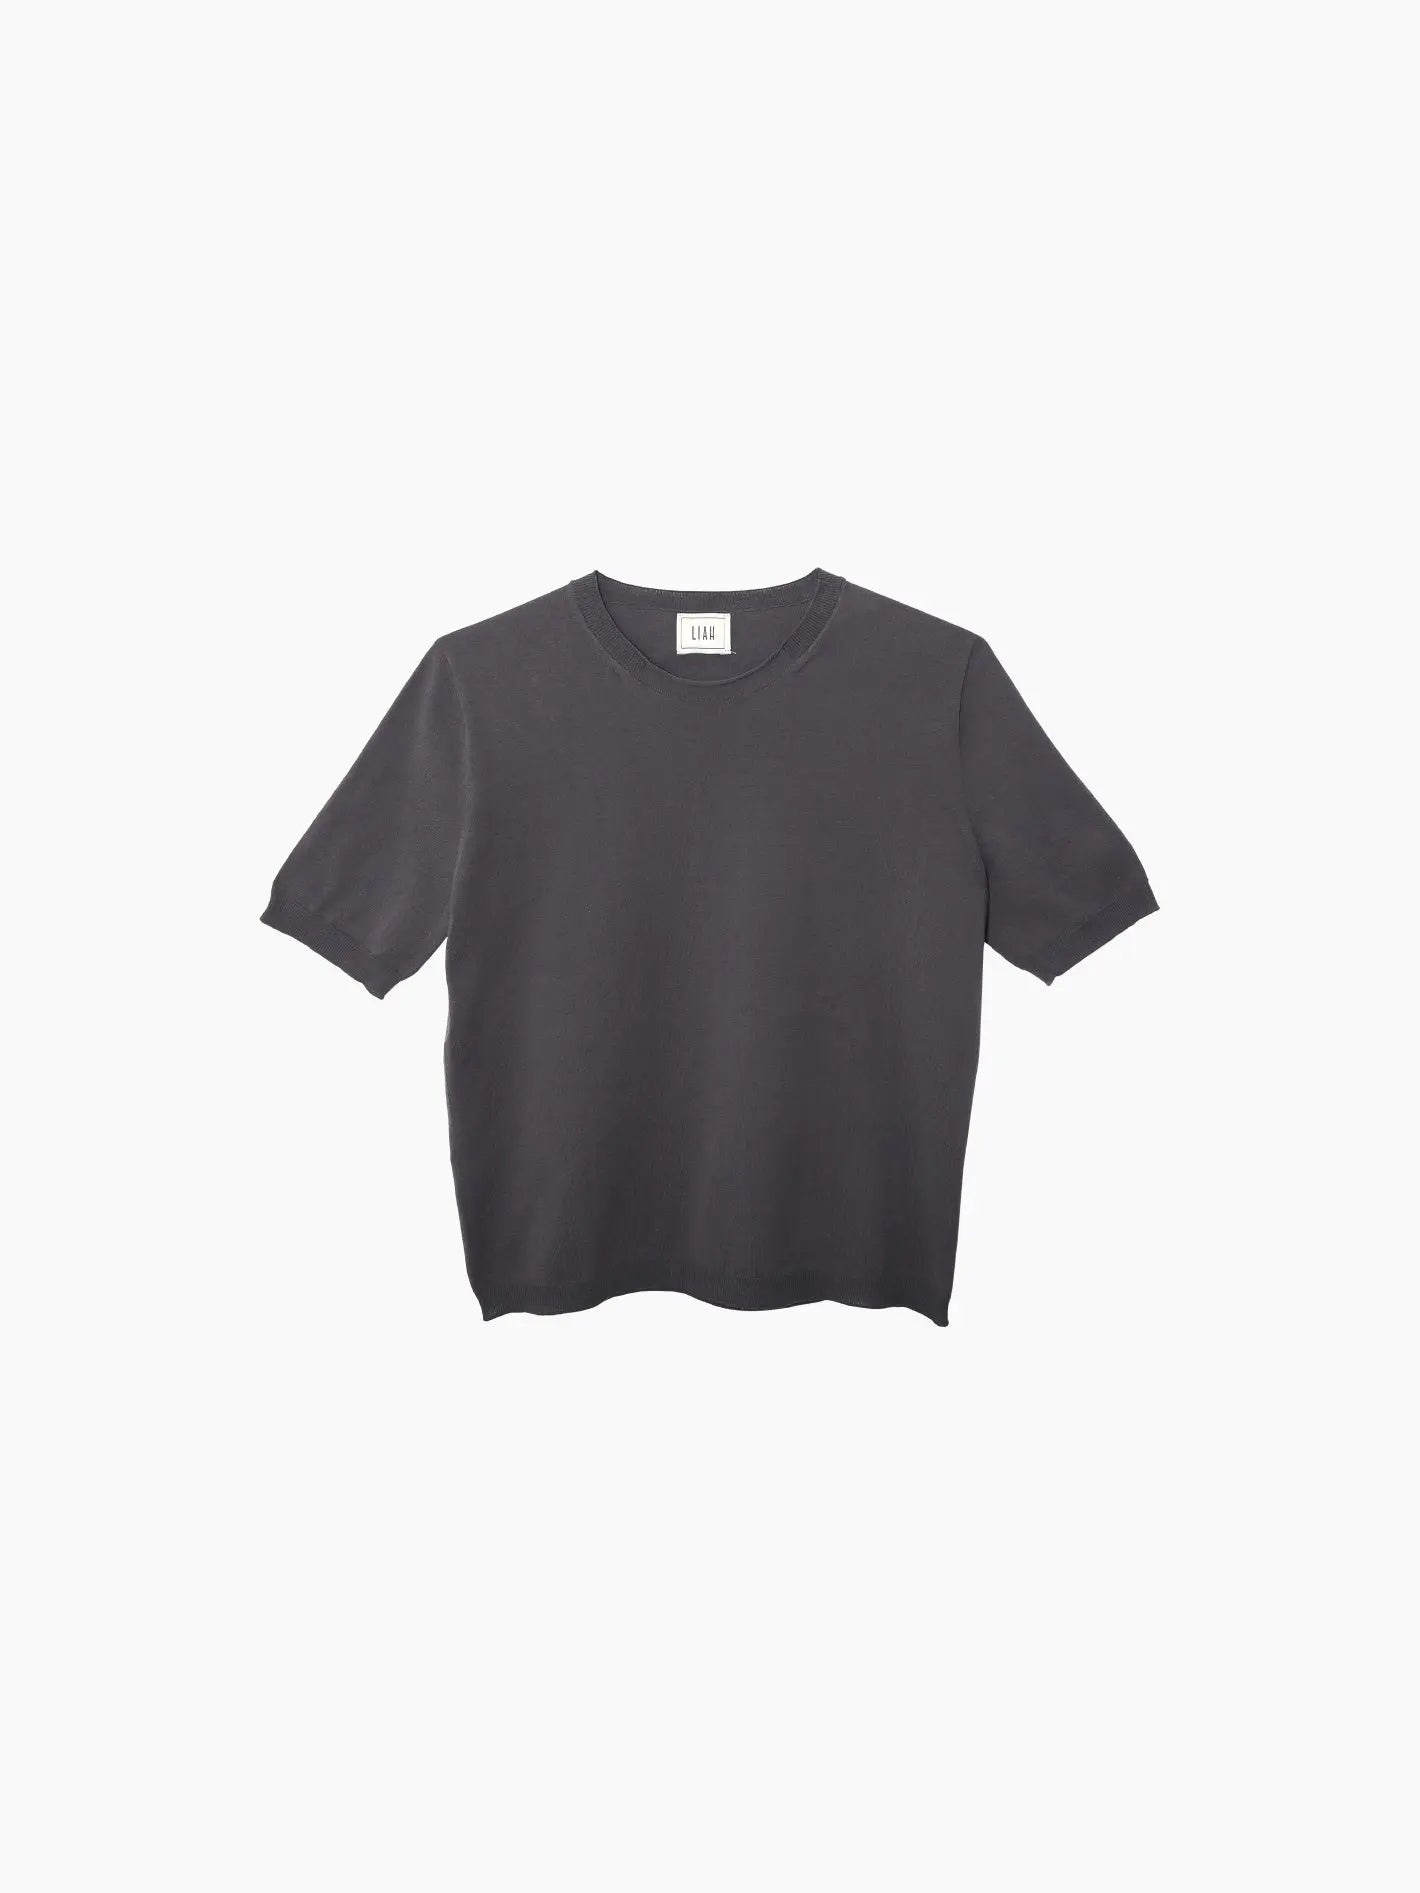 A plain, dark gray, short-sleeved T-shirt with a round neckline is displayed against a white background. This minimalistic design from Liah features no visible logos or graphics, offering a versatile addition to any wardrobe. This is the Gia T-Shirt Grey.